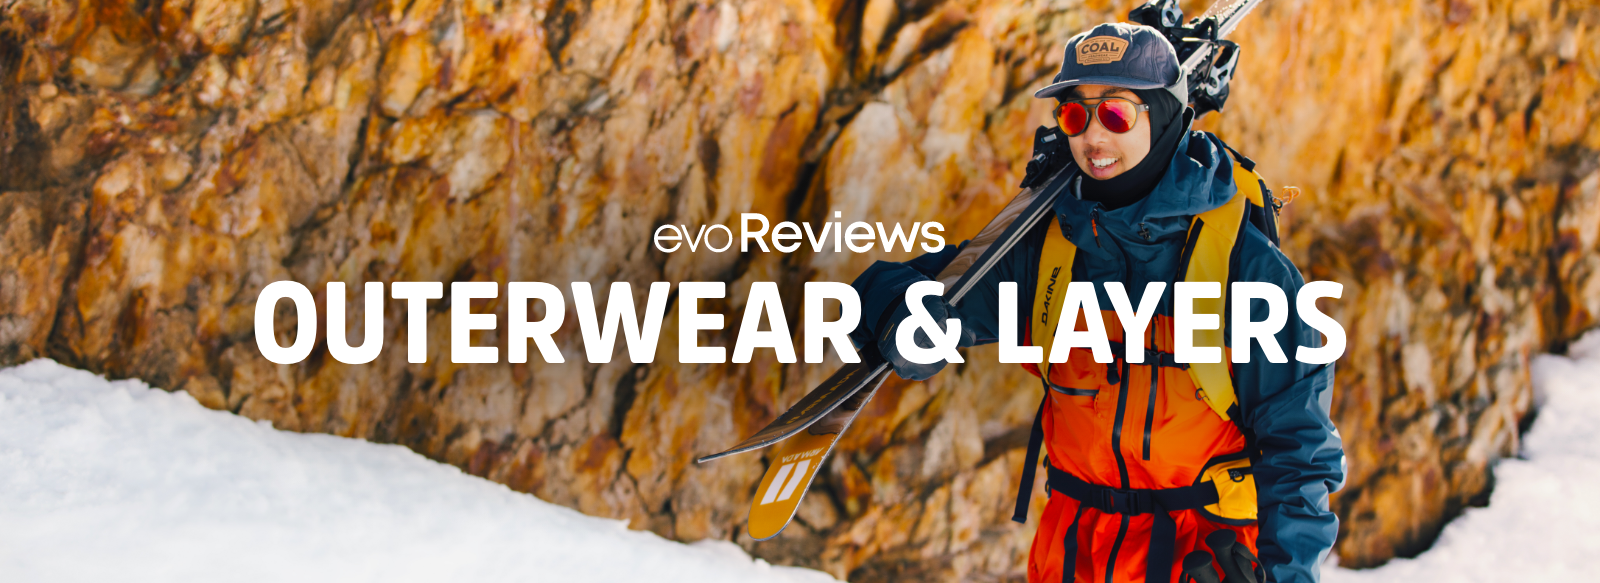 evoReviews Outerwear & layers reviews